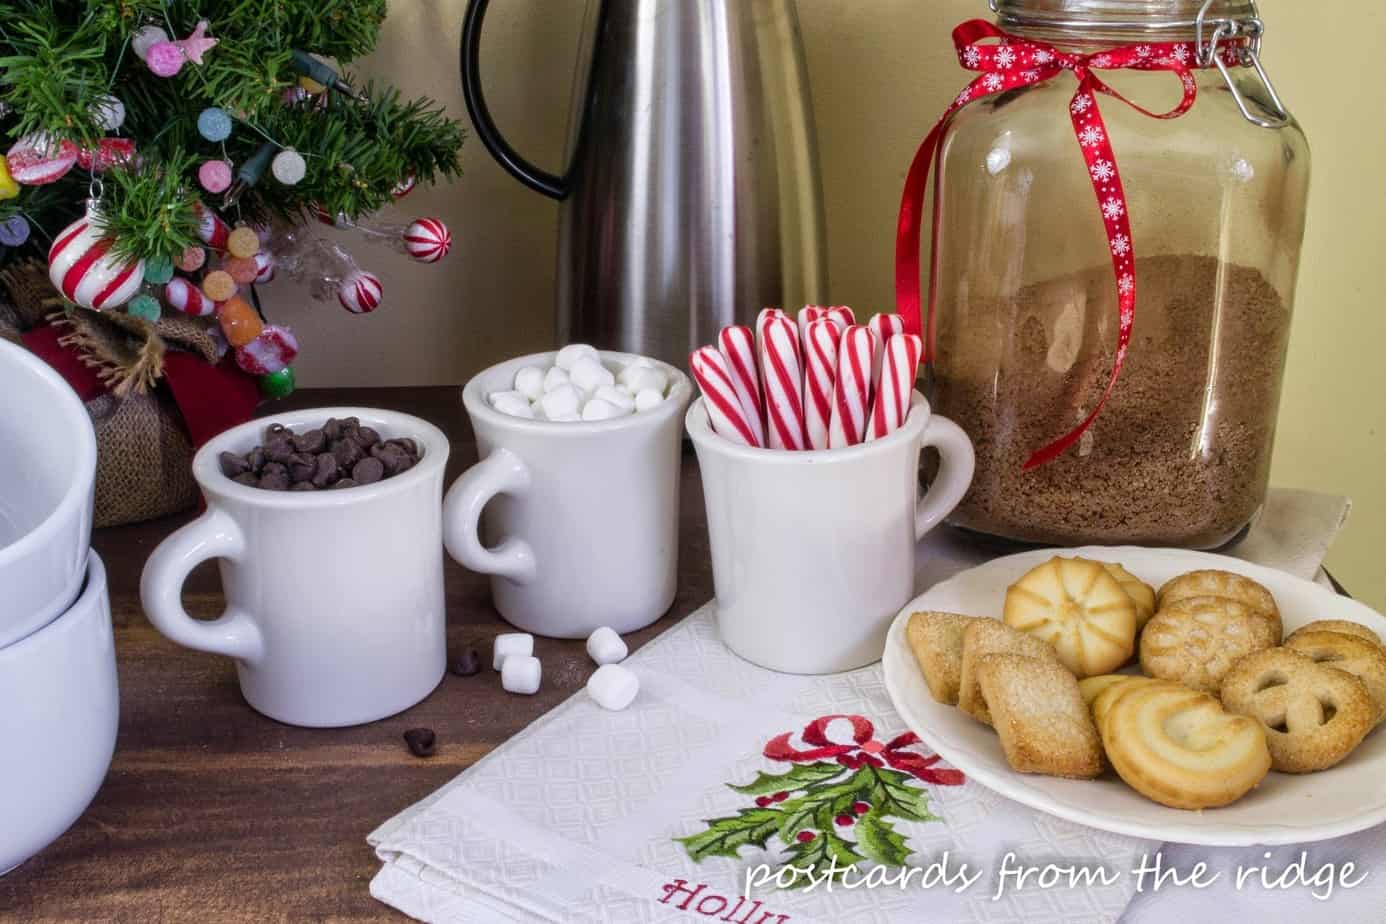 Such a pretty hot cocoa bar using vintage Homer Laughlin mugs for fun additions. Love the embroidered linen too.